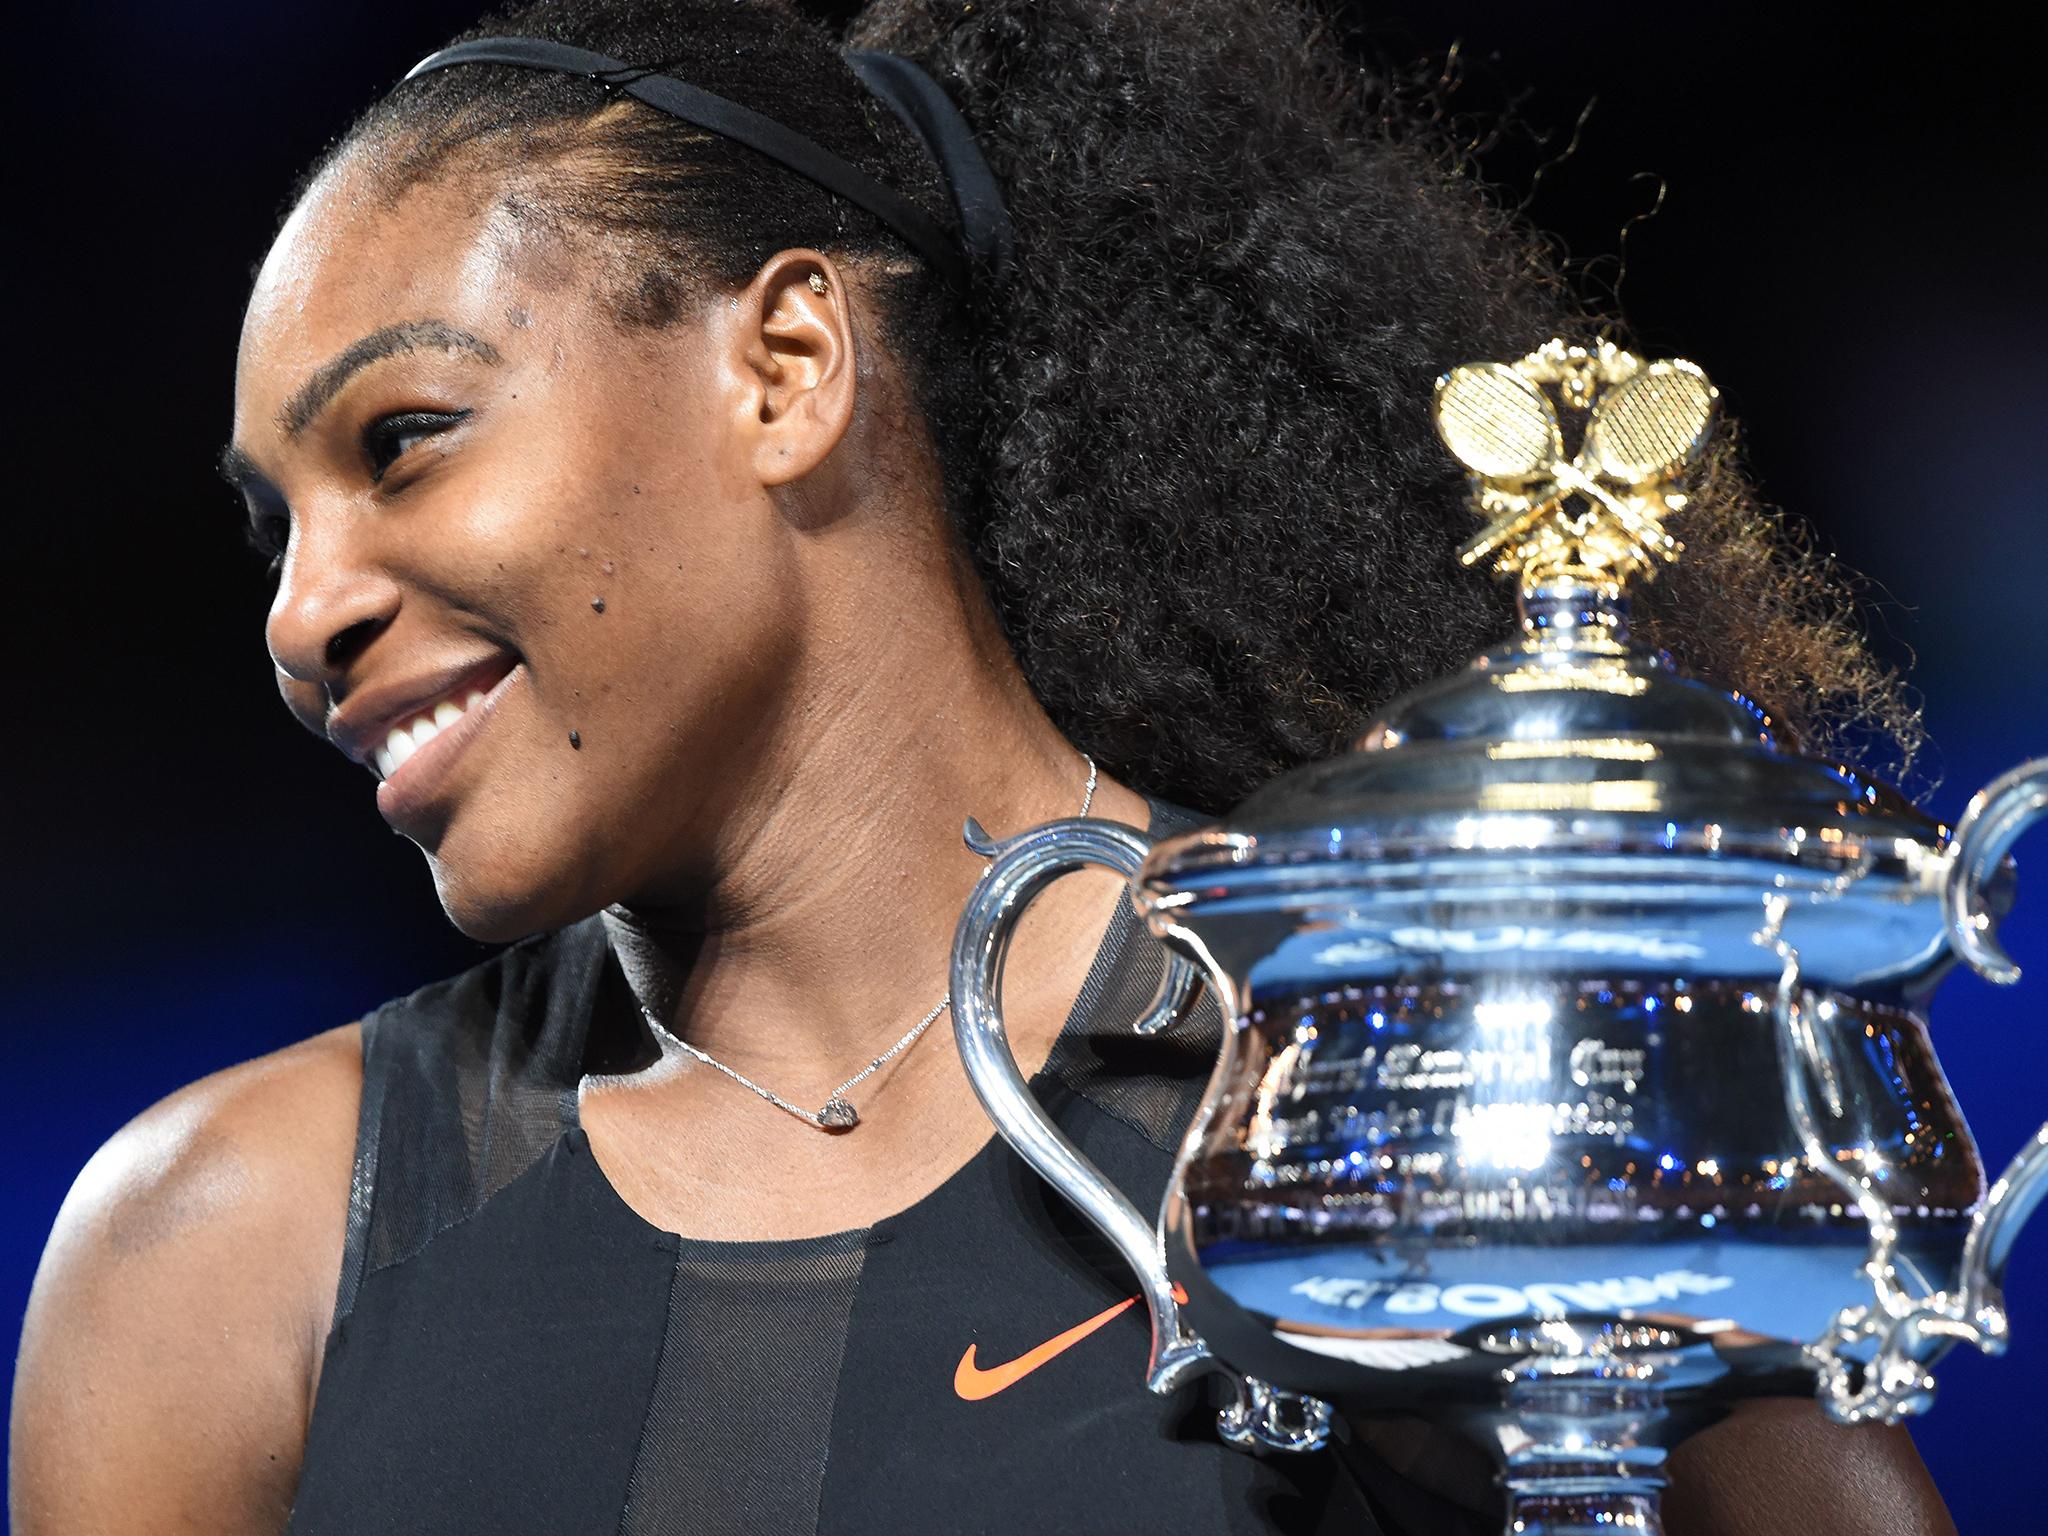 Williams won the tournament a year ago but won't defend her title